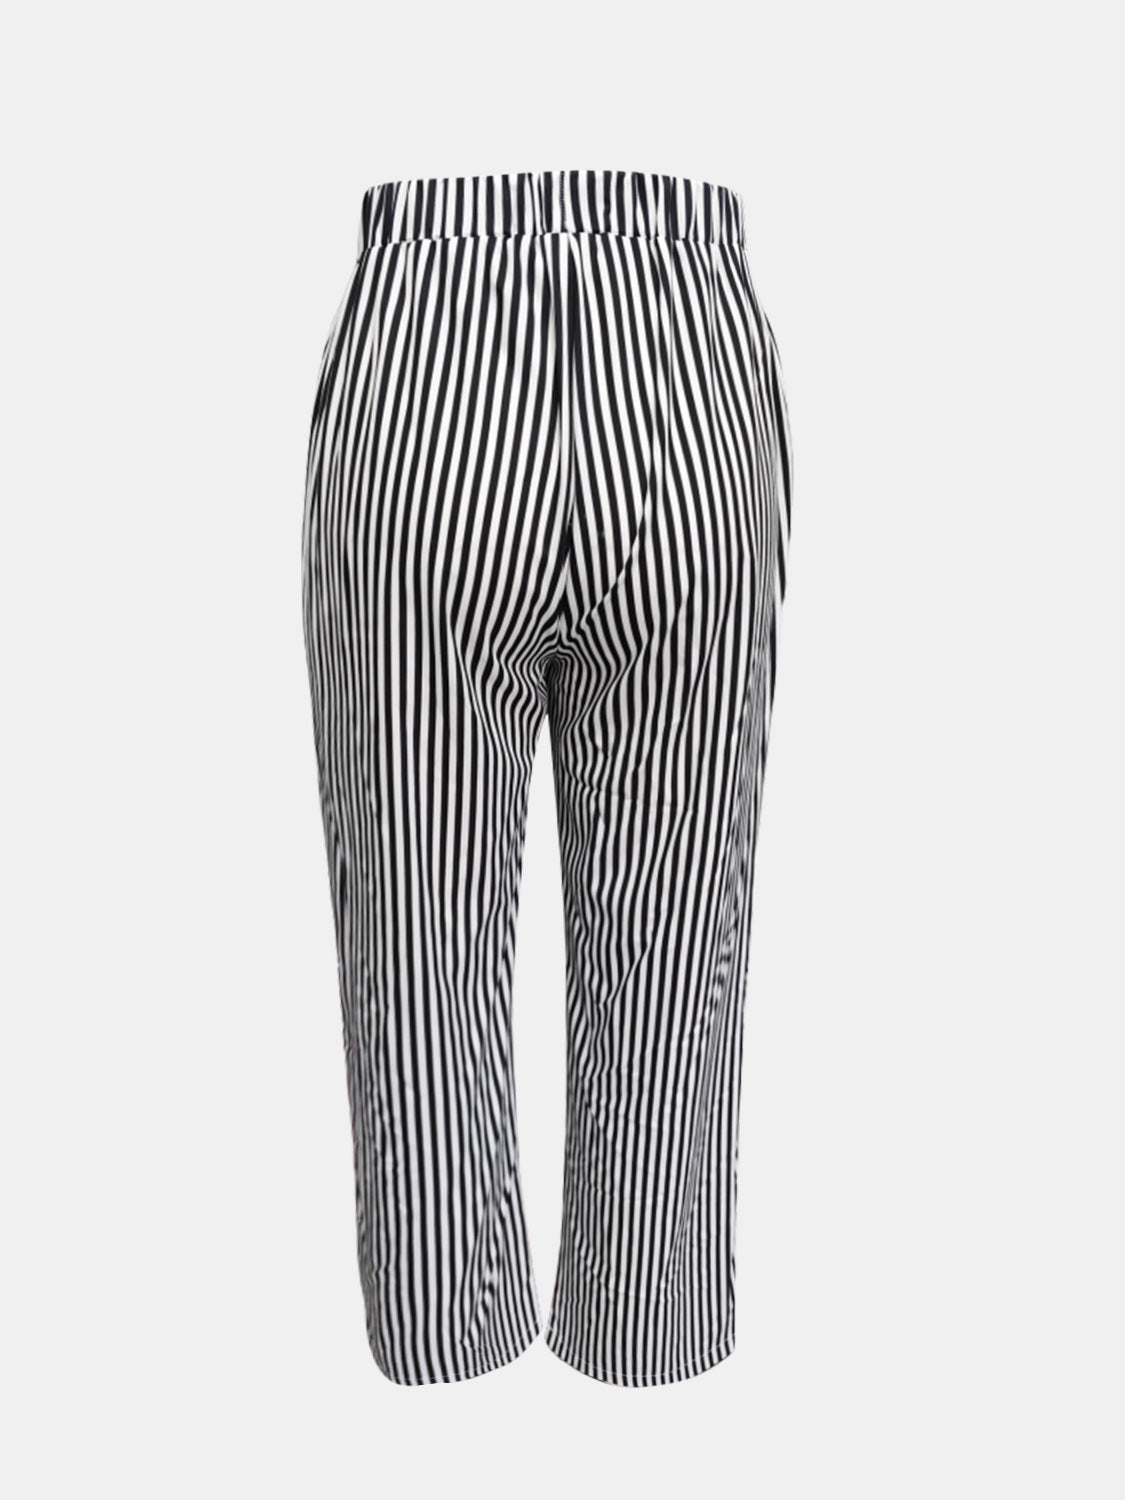 Striped Pants with Pockets